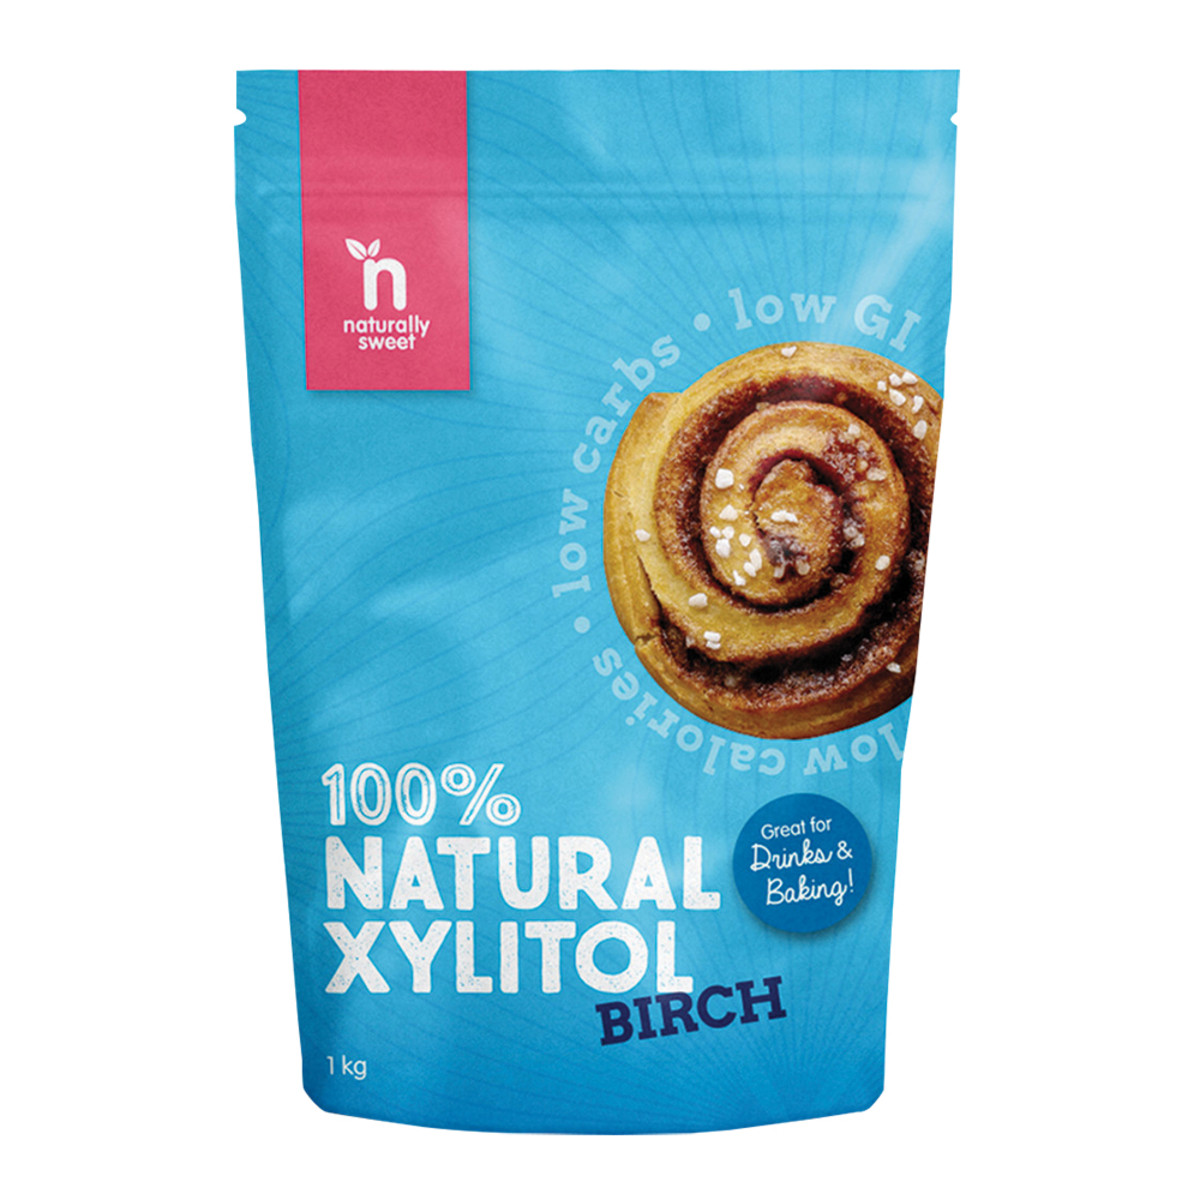 NATURALLY SWEET - Xylitol Birch